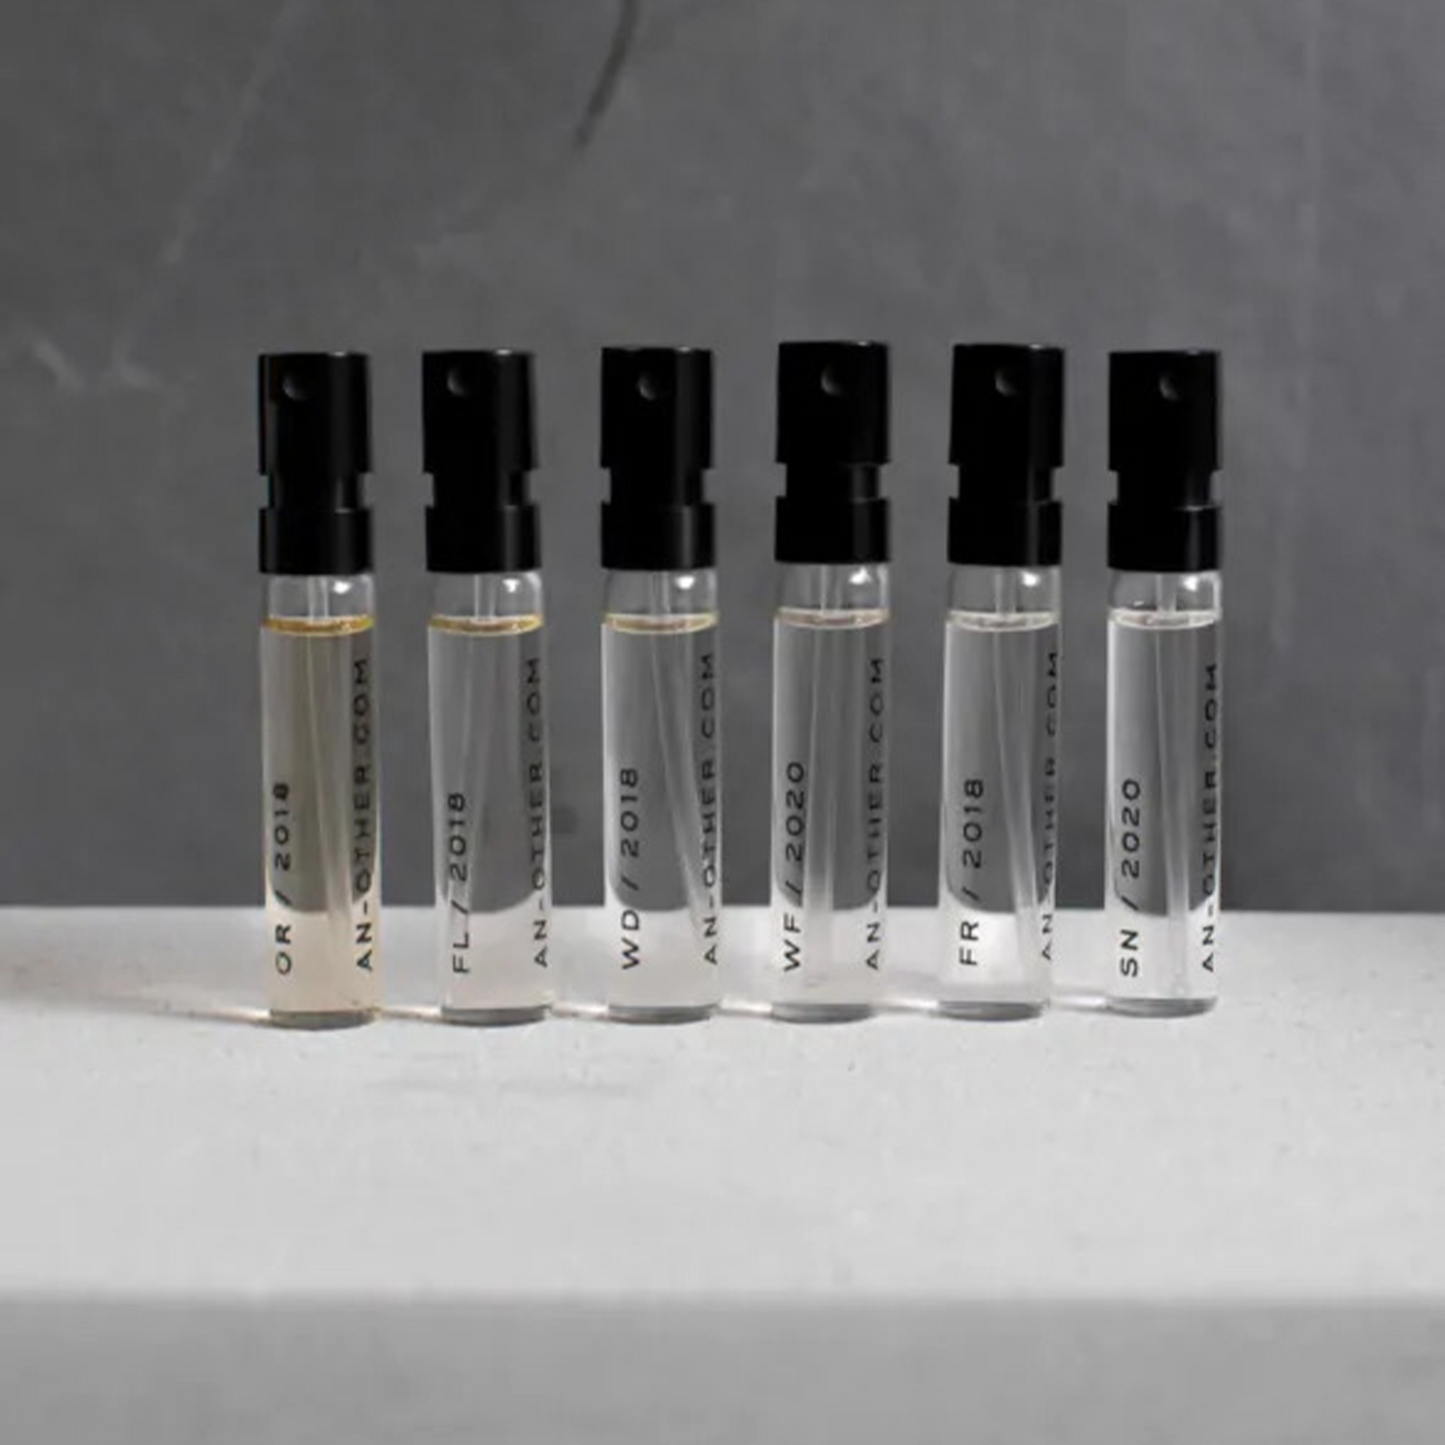 A.N Other Discover: Experience the full range of our gender-neutral modern fragrances.  This set includes: OR/2018, FL/2018, WF/2020, SN/2020, FR/2018, and WD/2018.